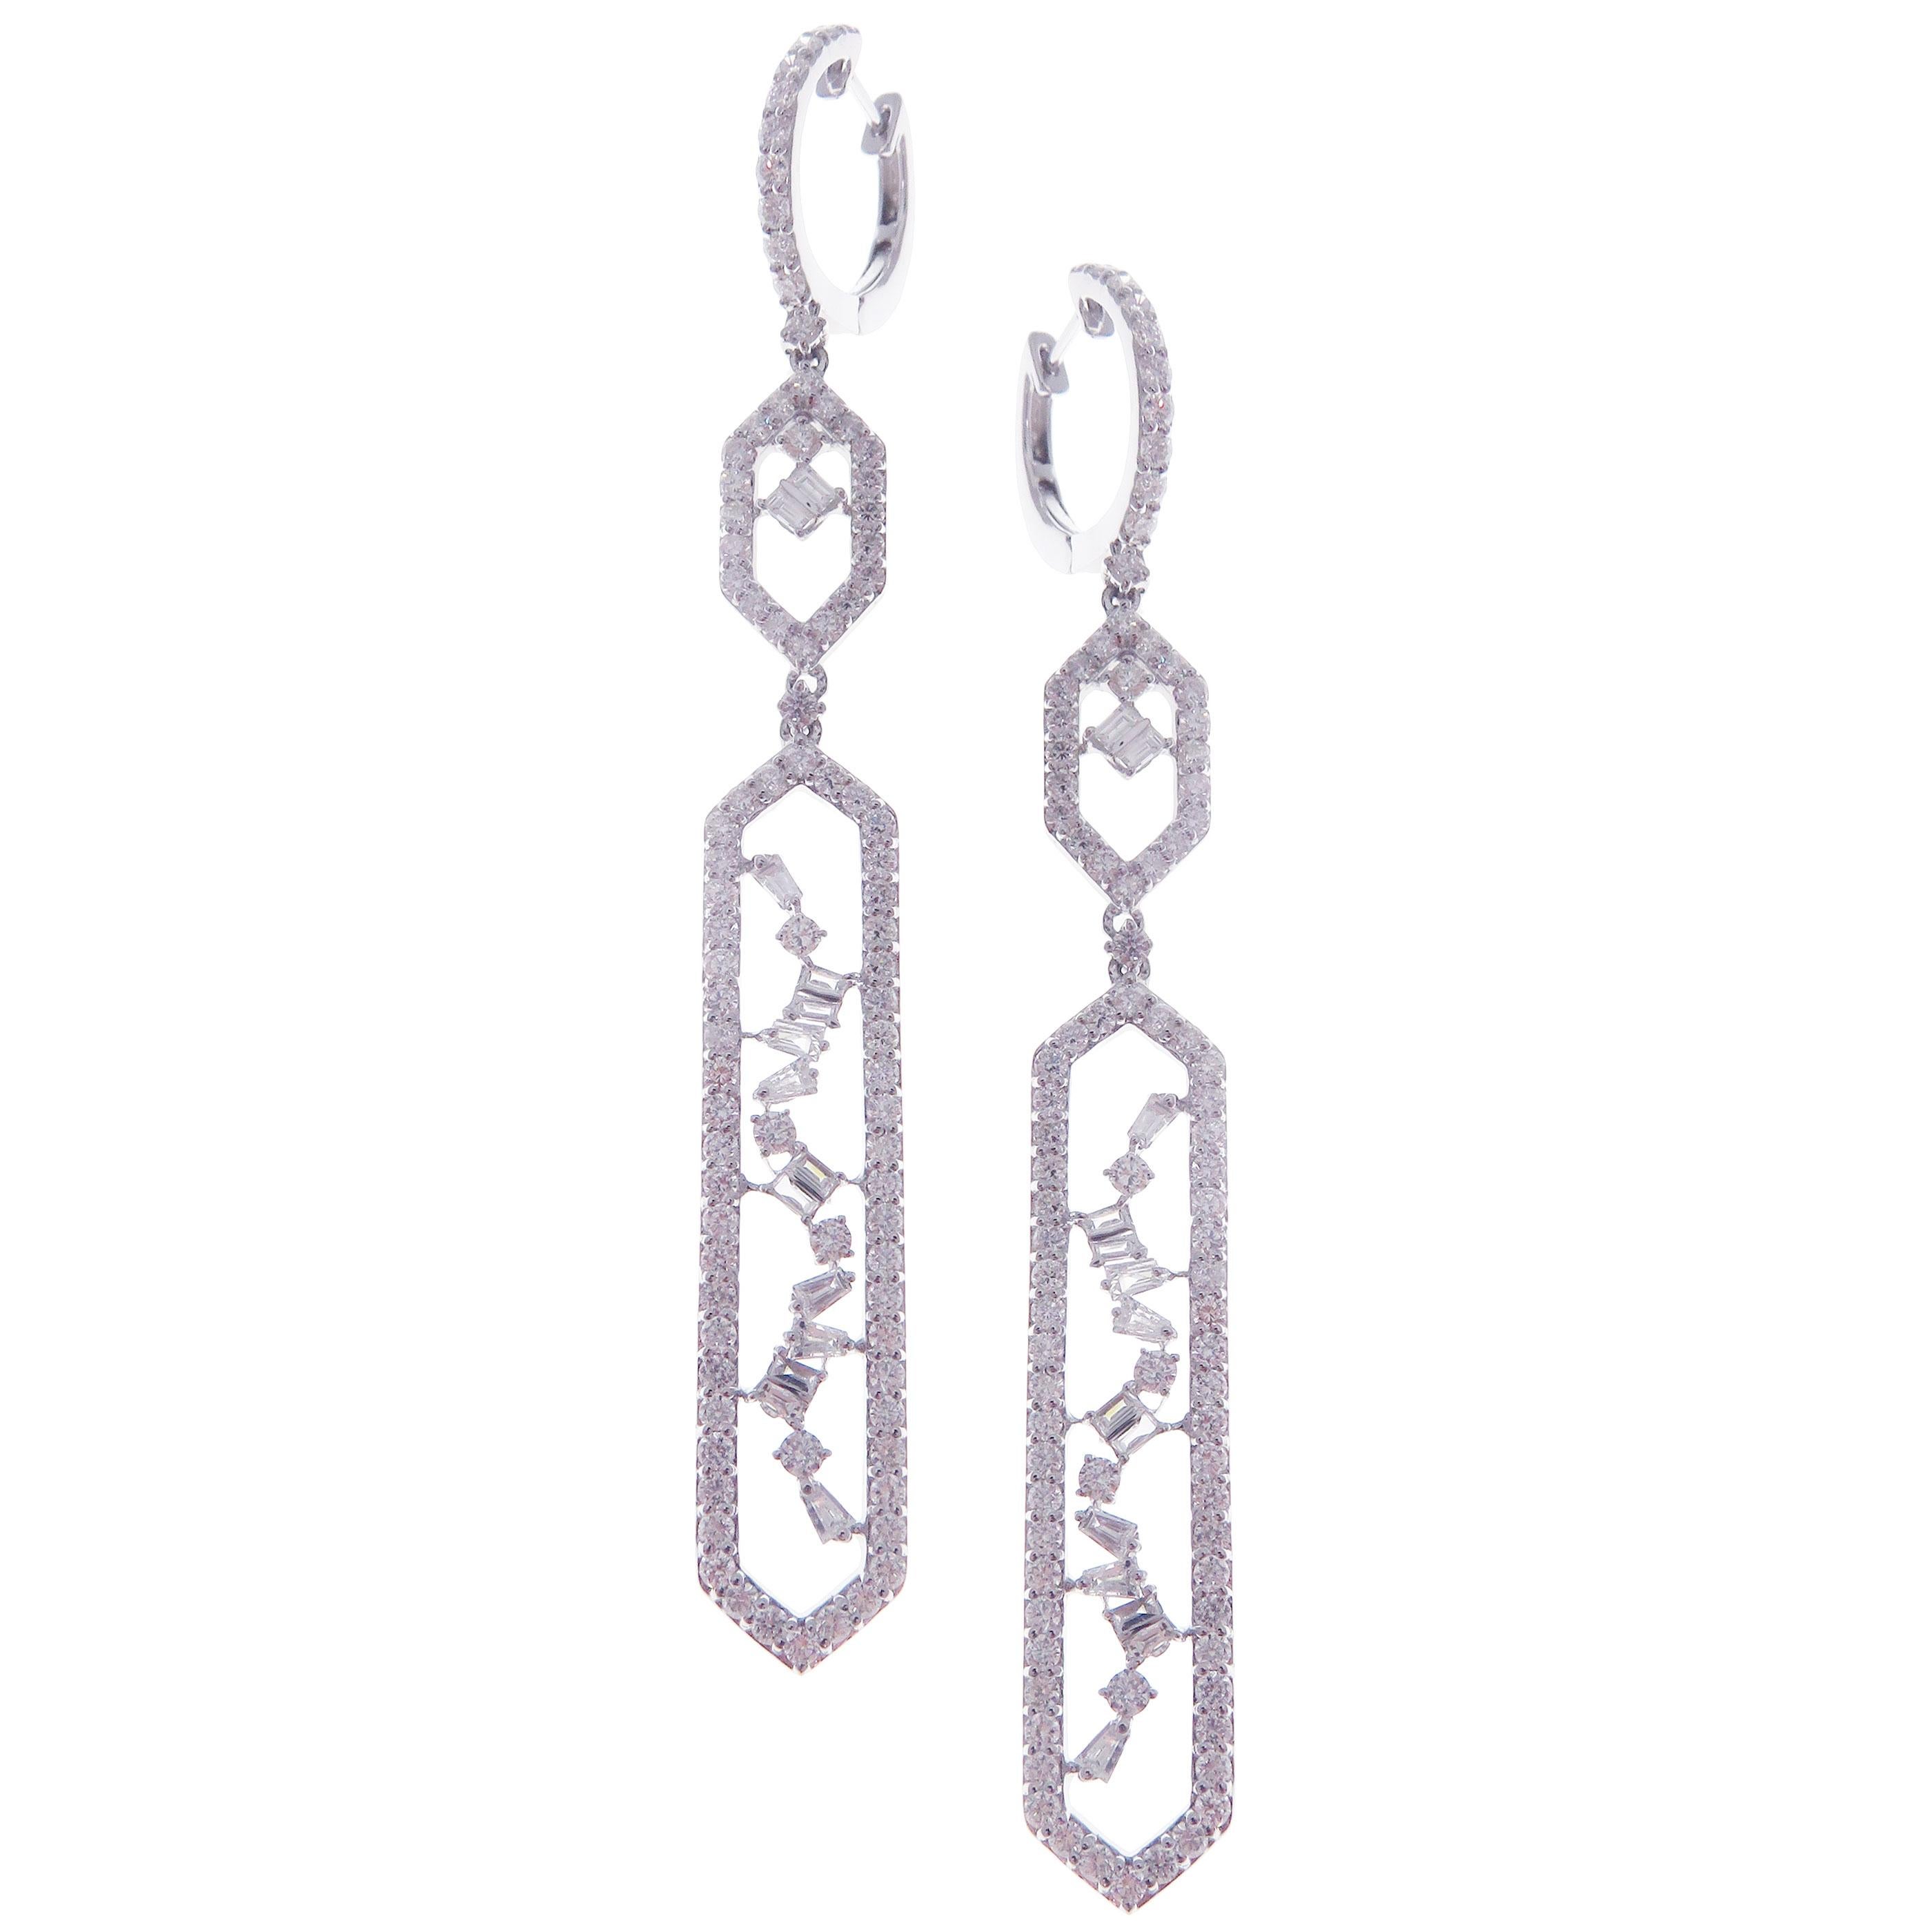 These symmetrical dangling diamond earrings are crafted in 18-karat white gold, featuring 178 round white diamonds totaling of 3.45 carats and 28 baguette white diamonds totaling of 0.66 carats.
Approximate total weight 9.21 grams.
These earrings